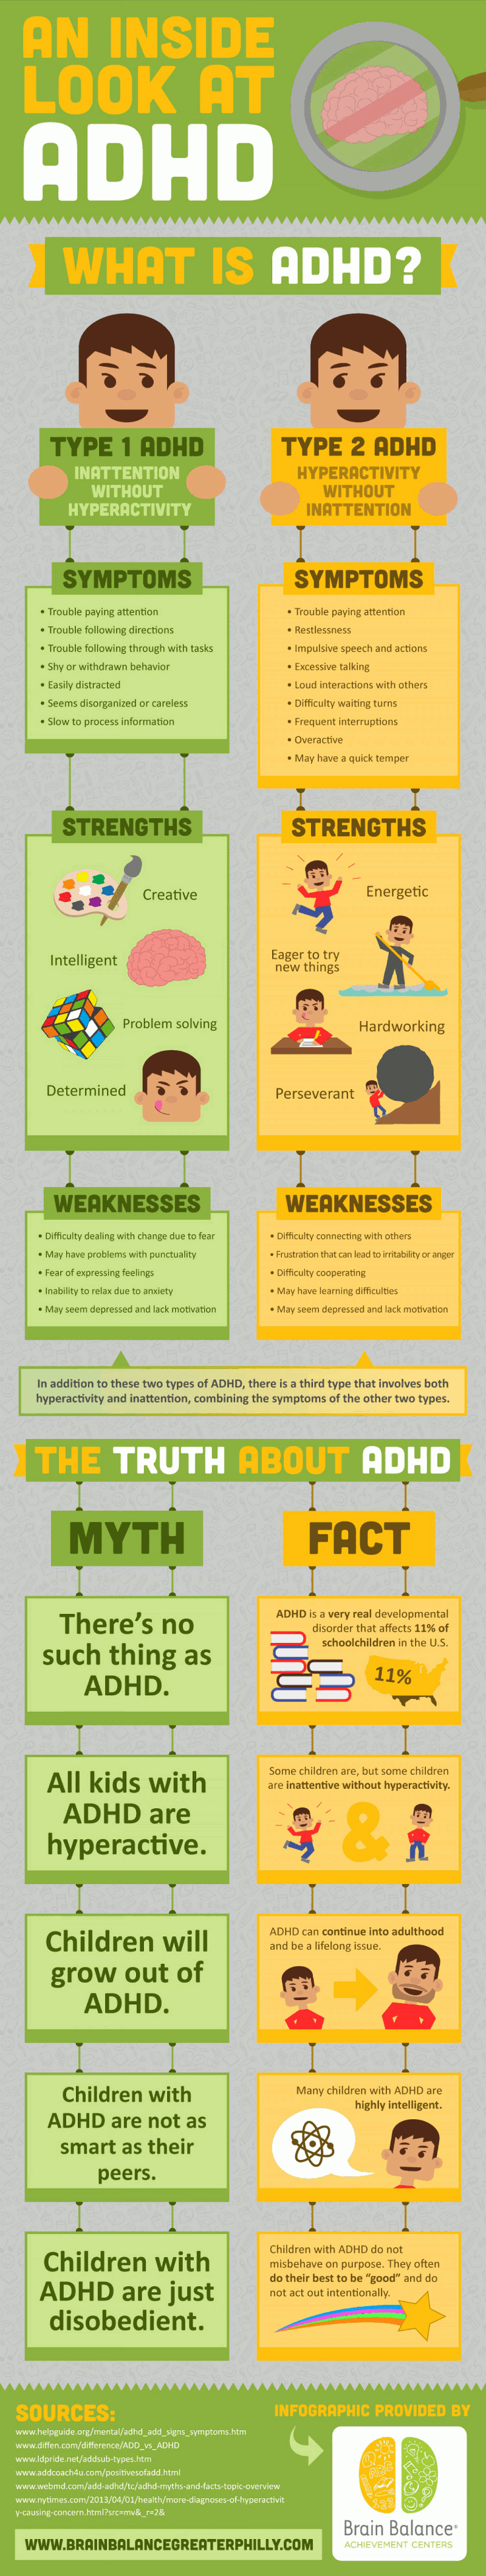 Myths and Facts About ADHD